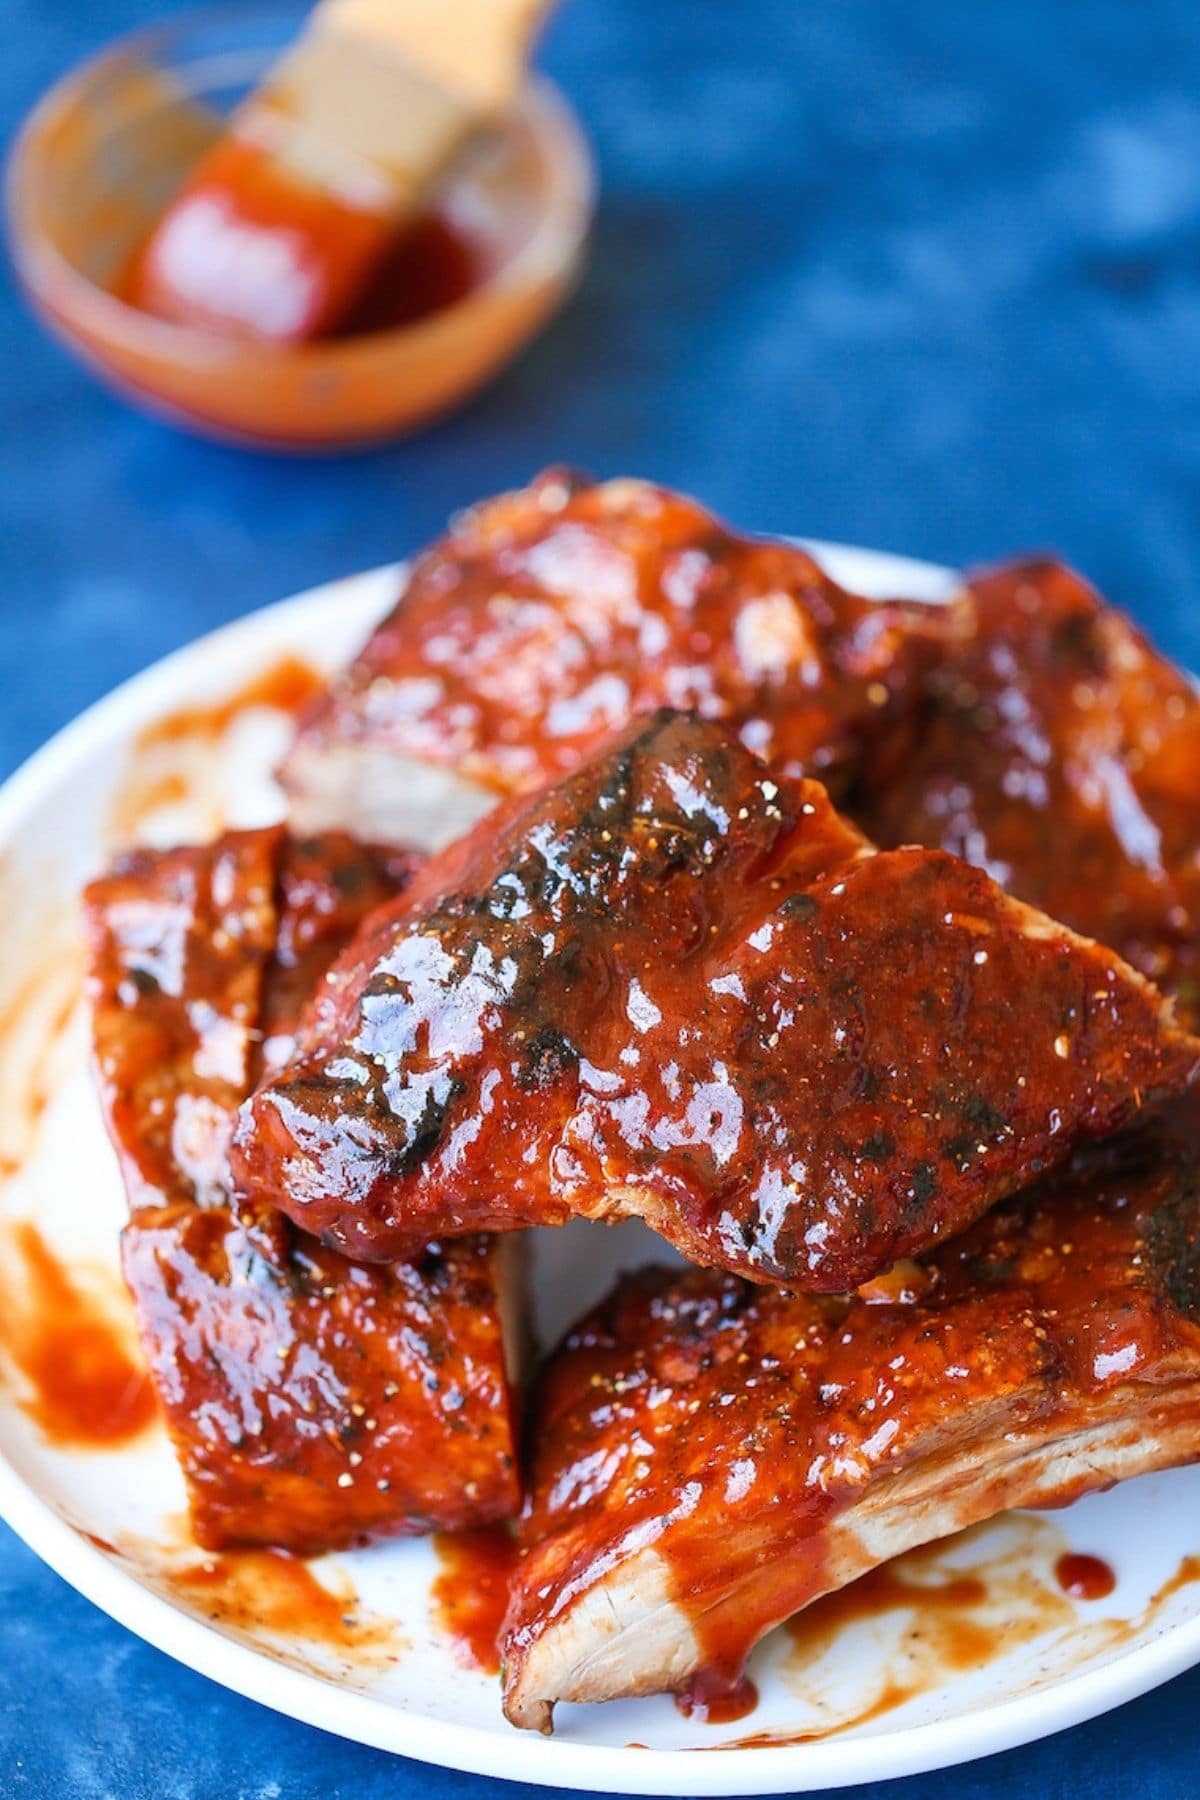 Barbecue ribs on white platter